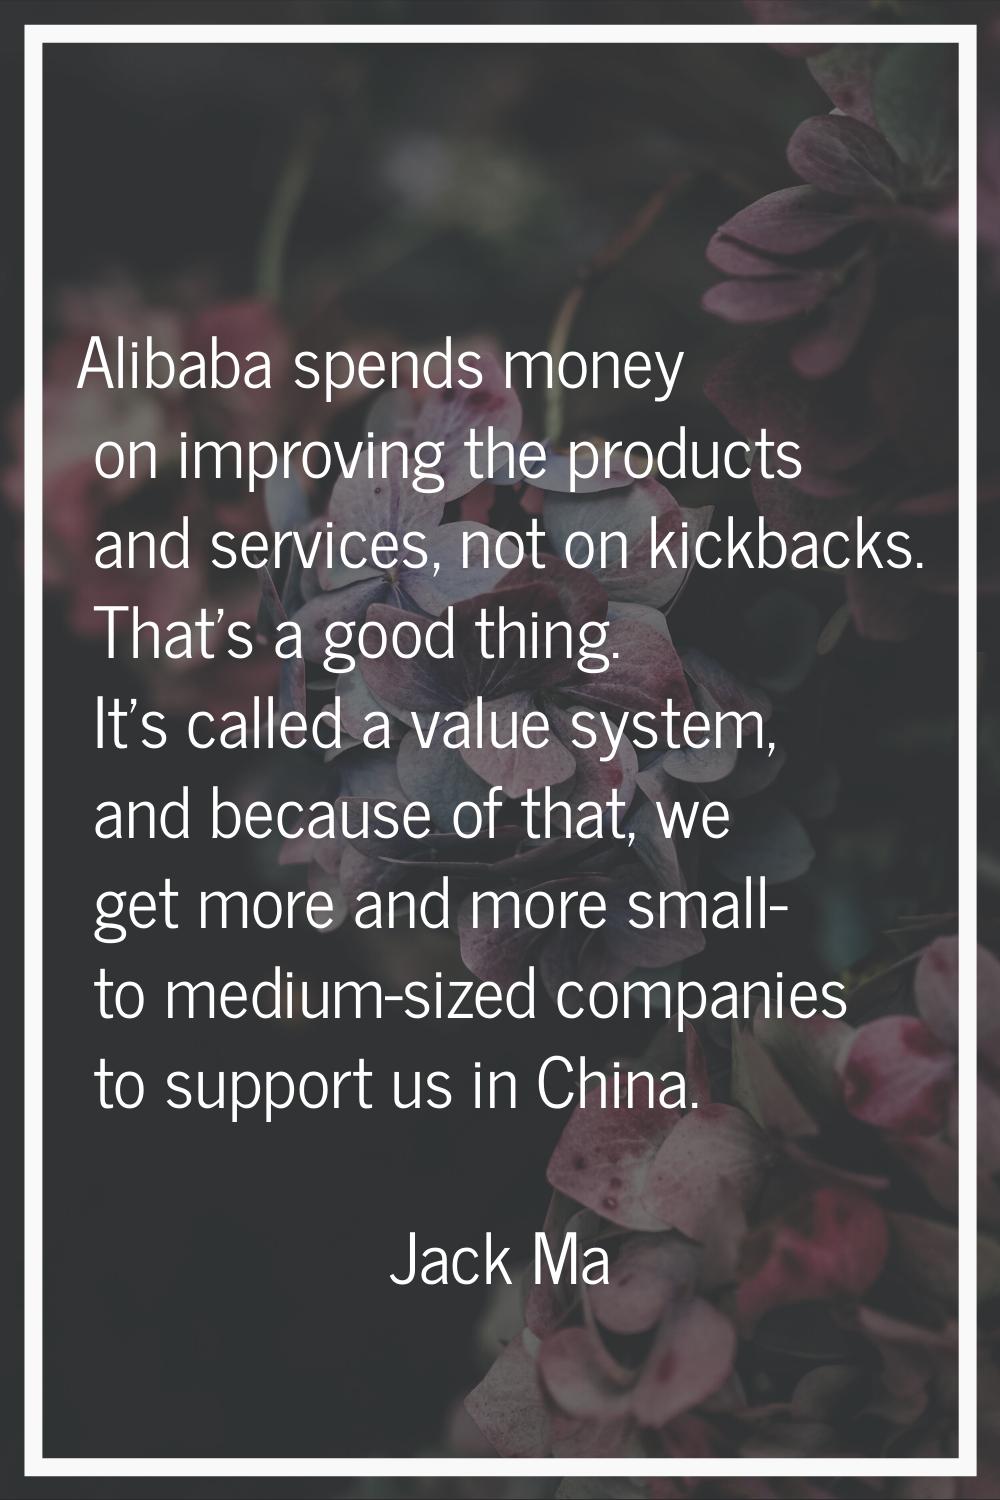 Alibaba spends money on improving the products and services, not on kickbacks. That's a good thing.